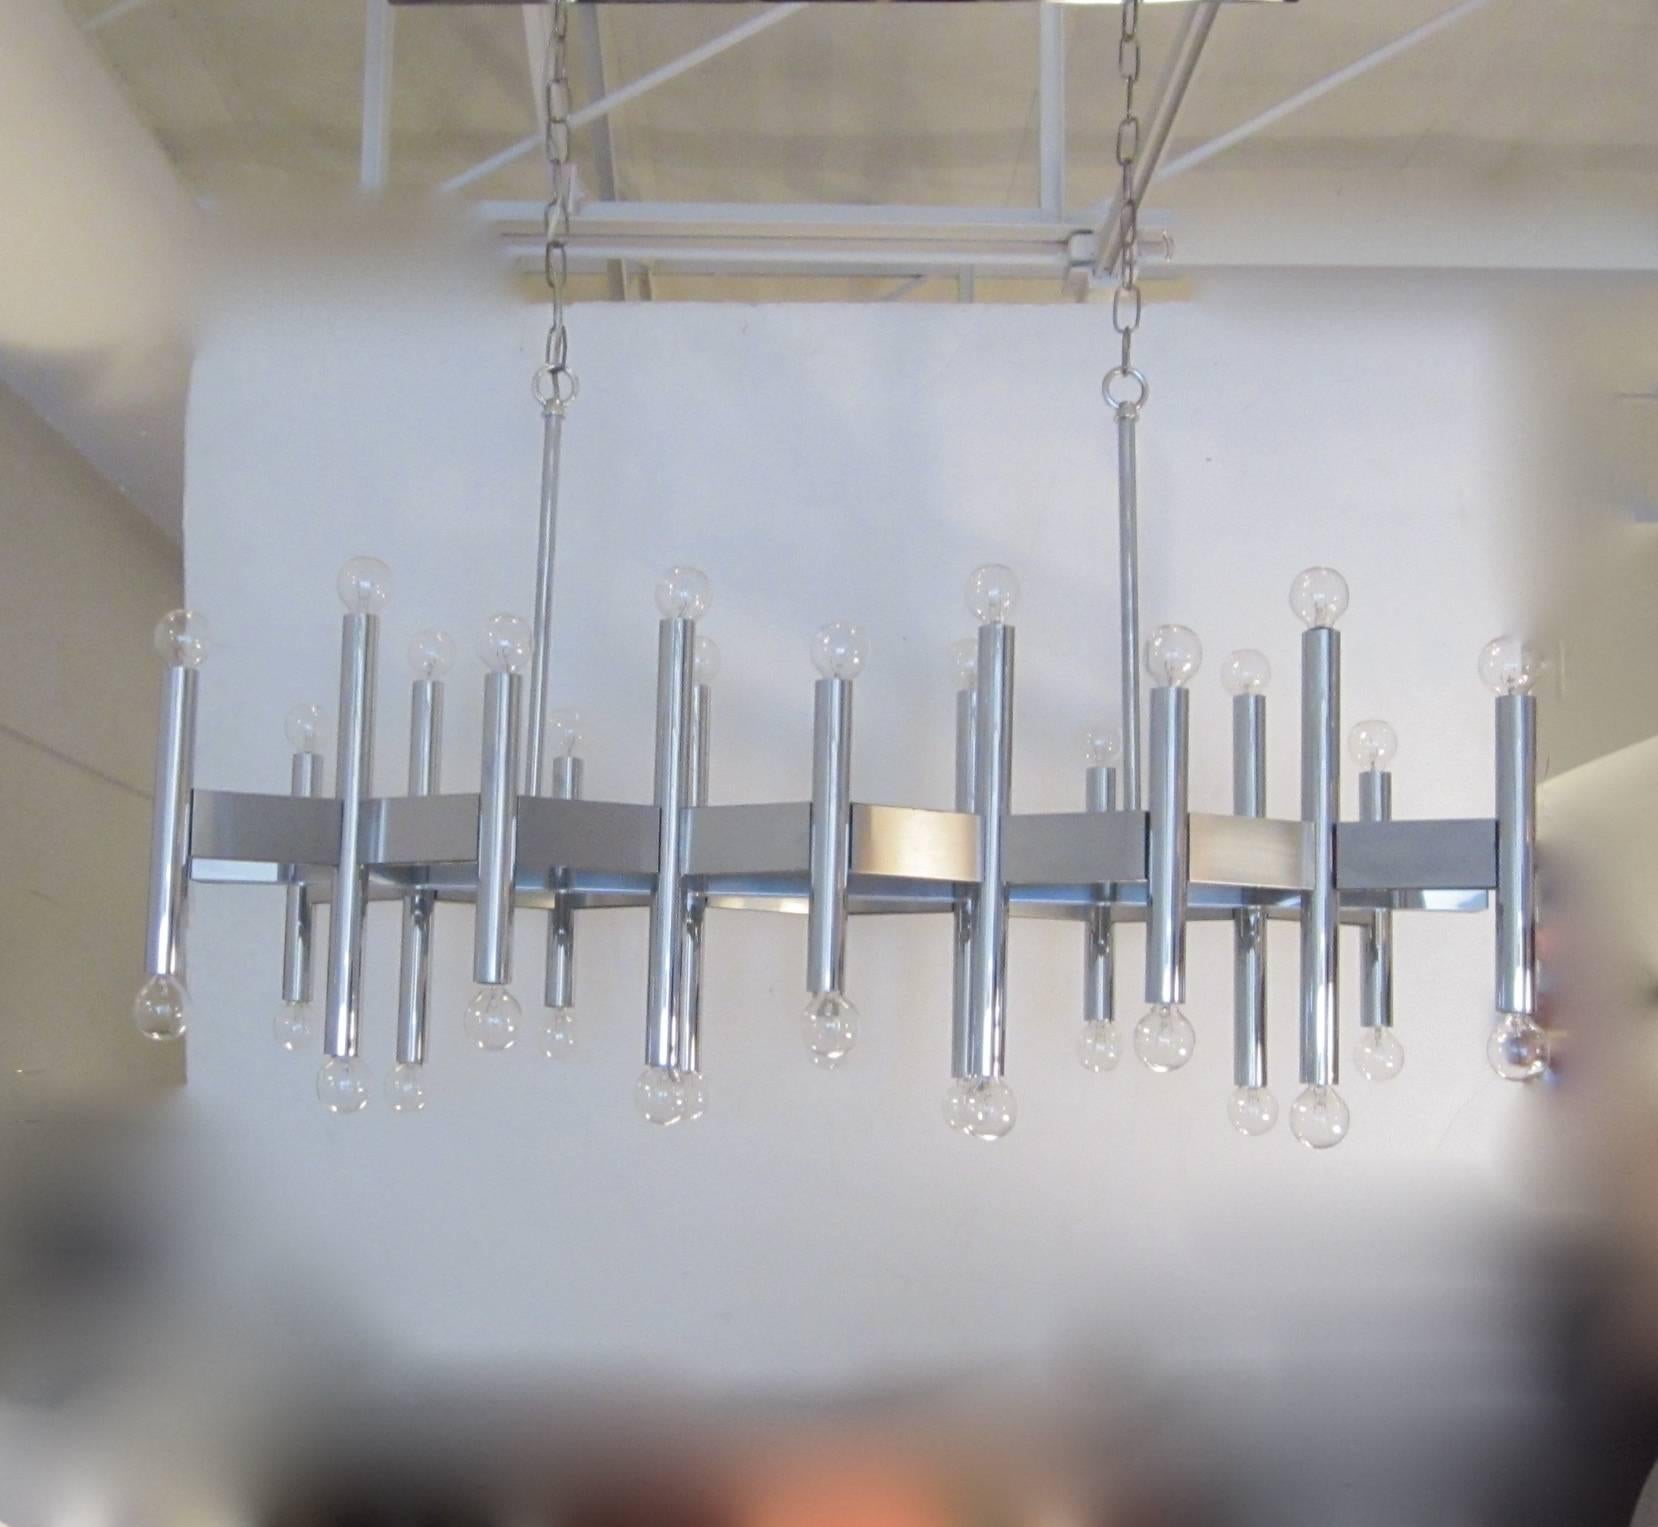 A spectacular 36-light hanging fixture in chrome and steel in a chevron pattern by Gaetano Sciolari. The fixture has rods that extend upwards from the top with hoops that connect to an adjustable chain which then attach to the top rectangular